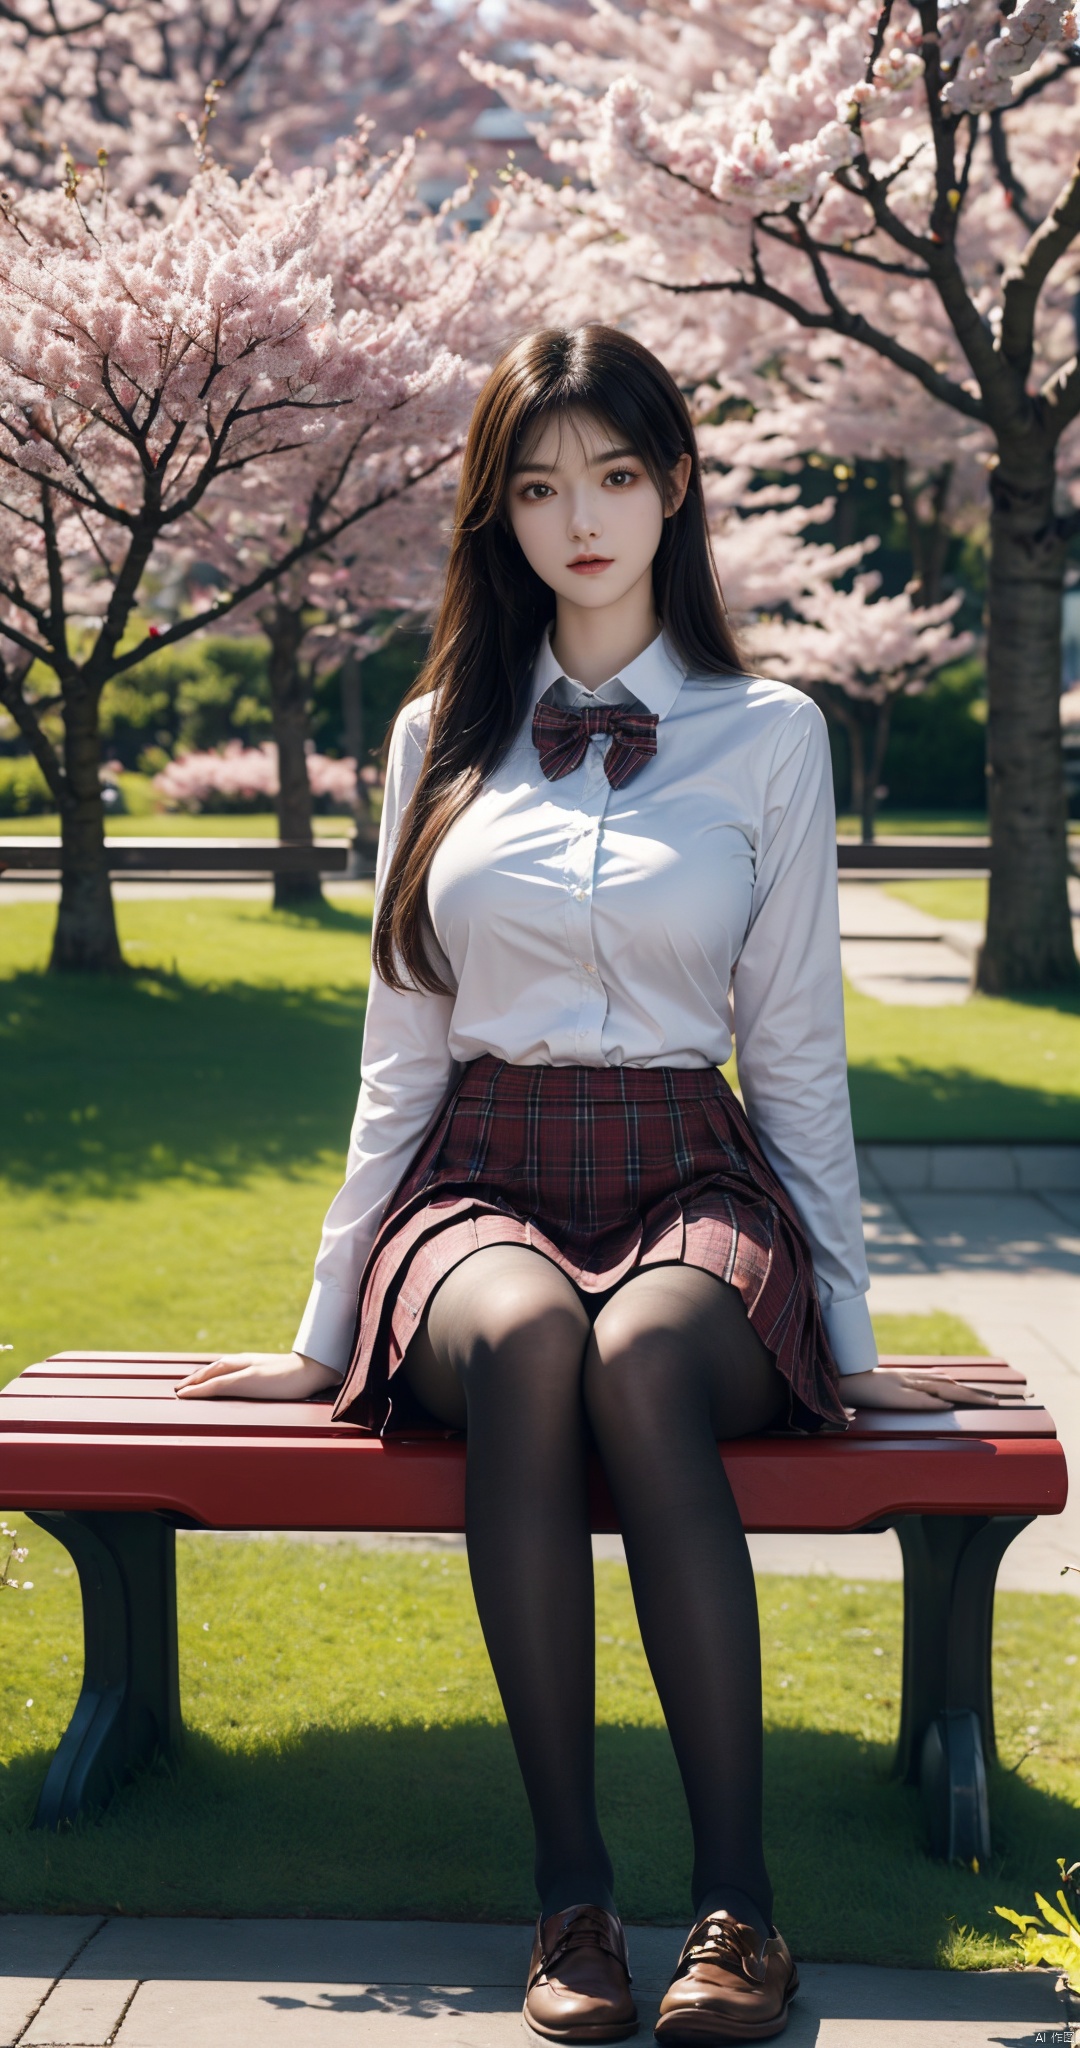 masterpiece,best quality,extremely detailed 8K wallpaper,1girl,JK,plaid skirt,school uniform,brown shoes,sitting, JK, (big breasts:1.39), ((poakl)),upper body,(Sitting on a park benchr:1.3),(Under the cherry trees in the university campus garden:1.3)